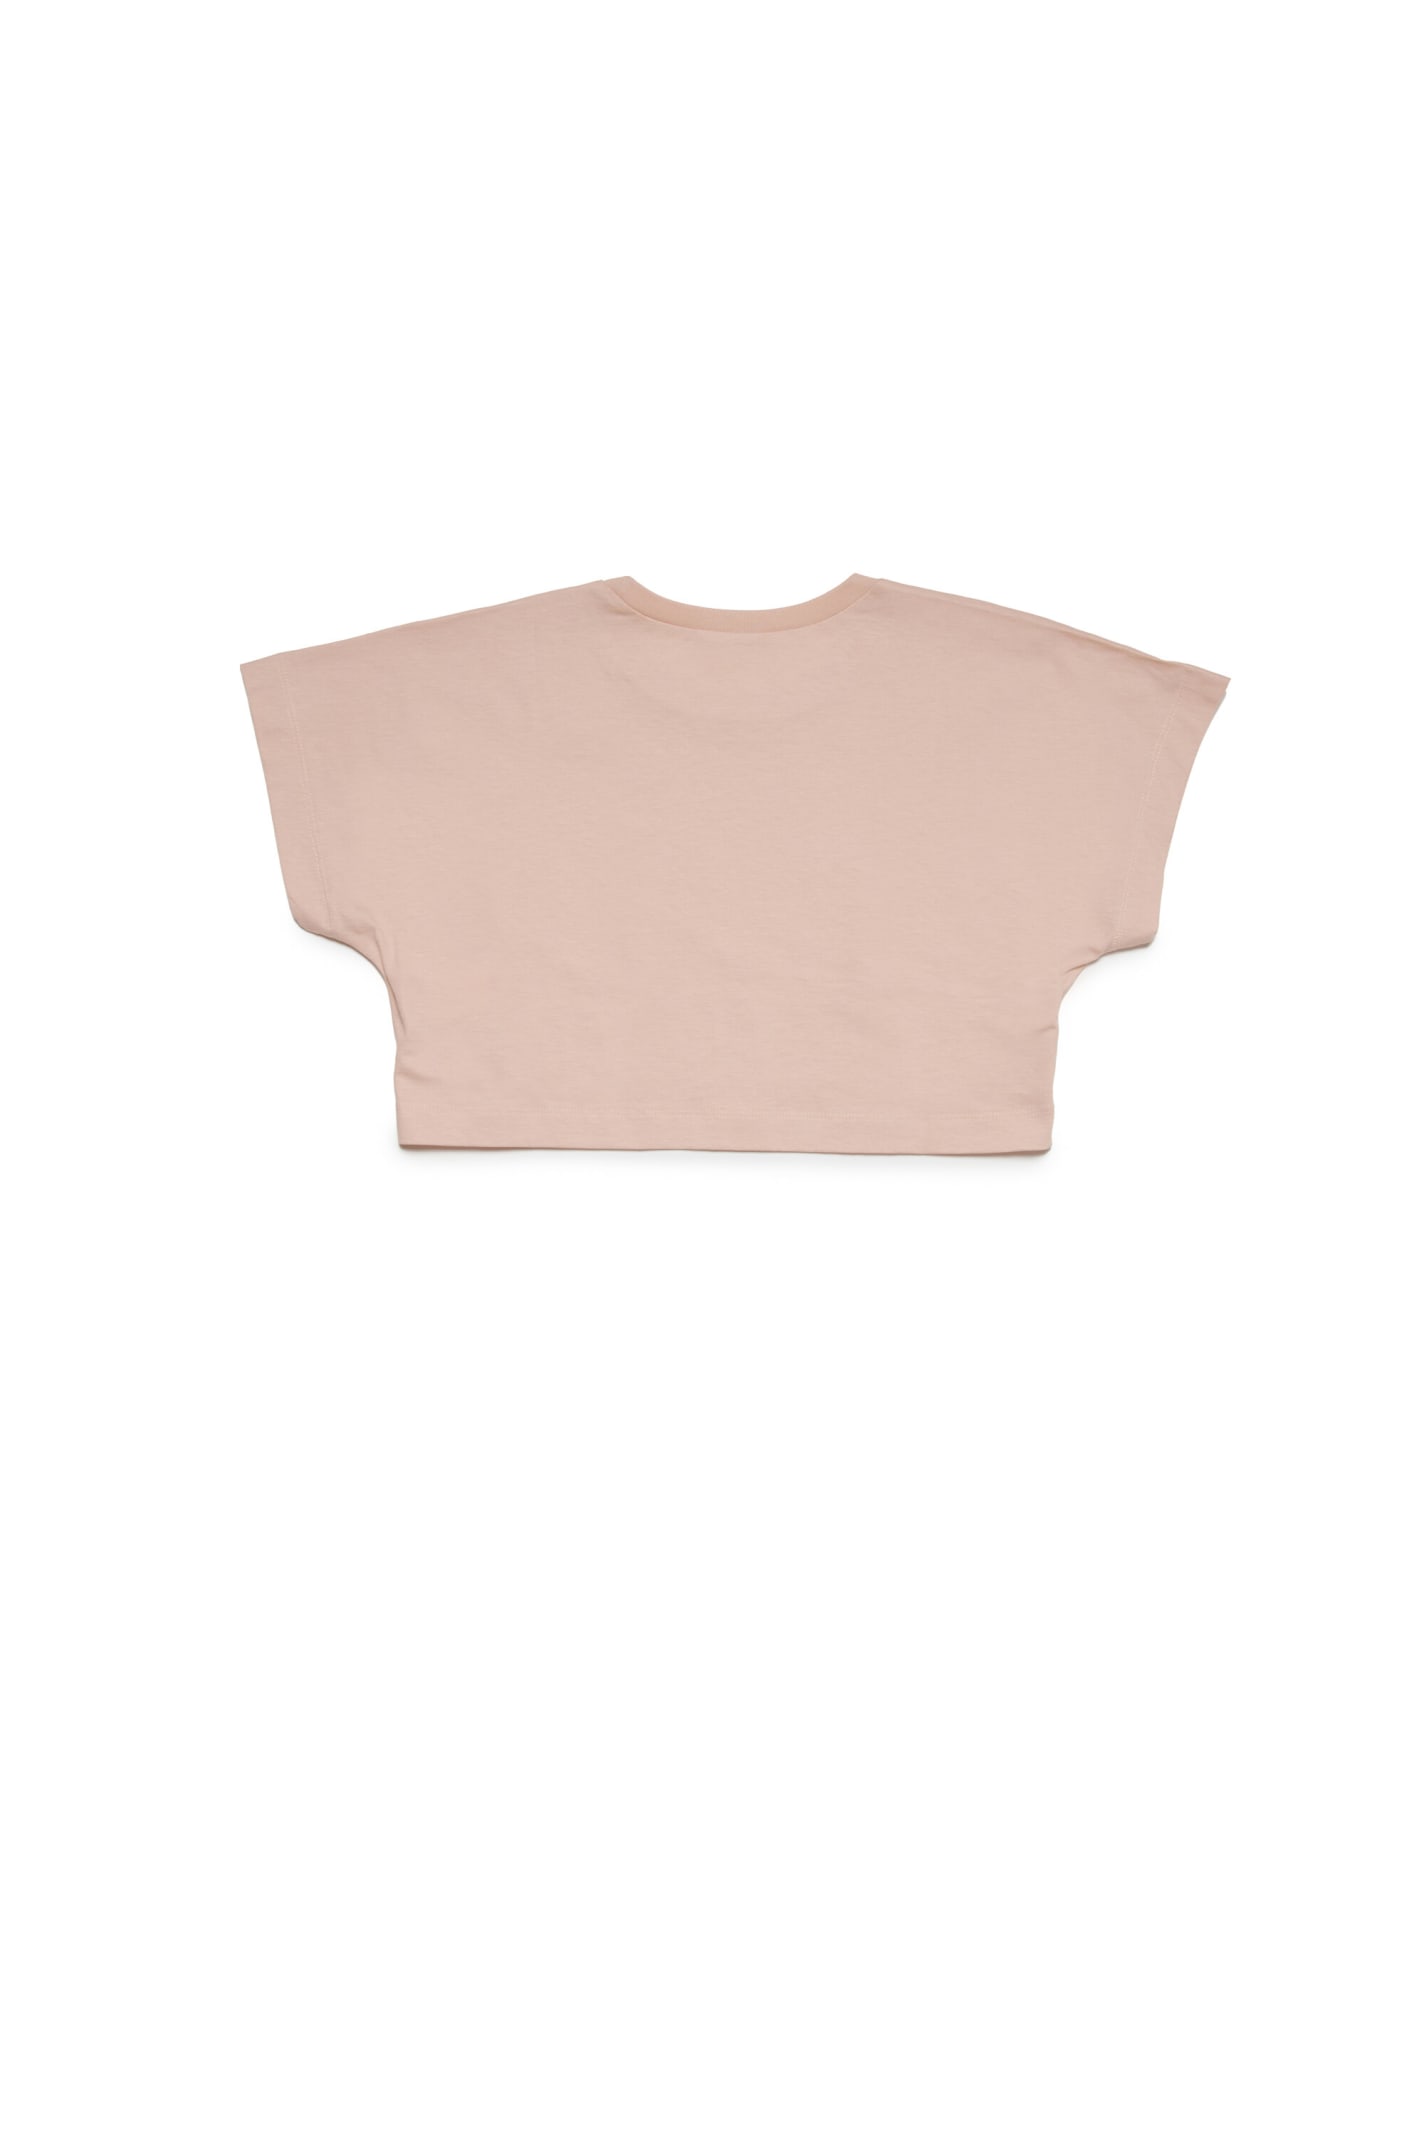 Shop N°21 N21t170f T-shirt N21 Branded Cropped T-shirt In Cipria